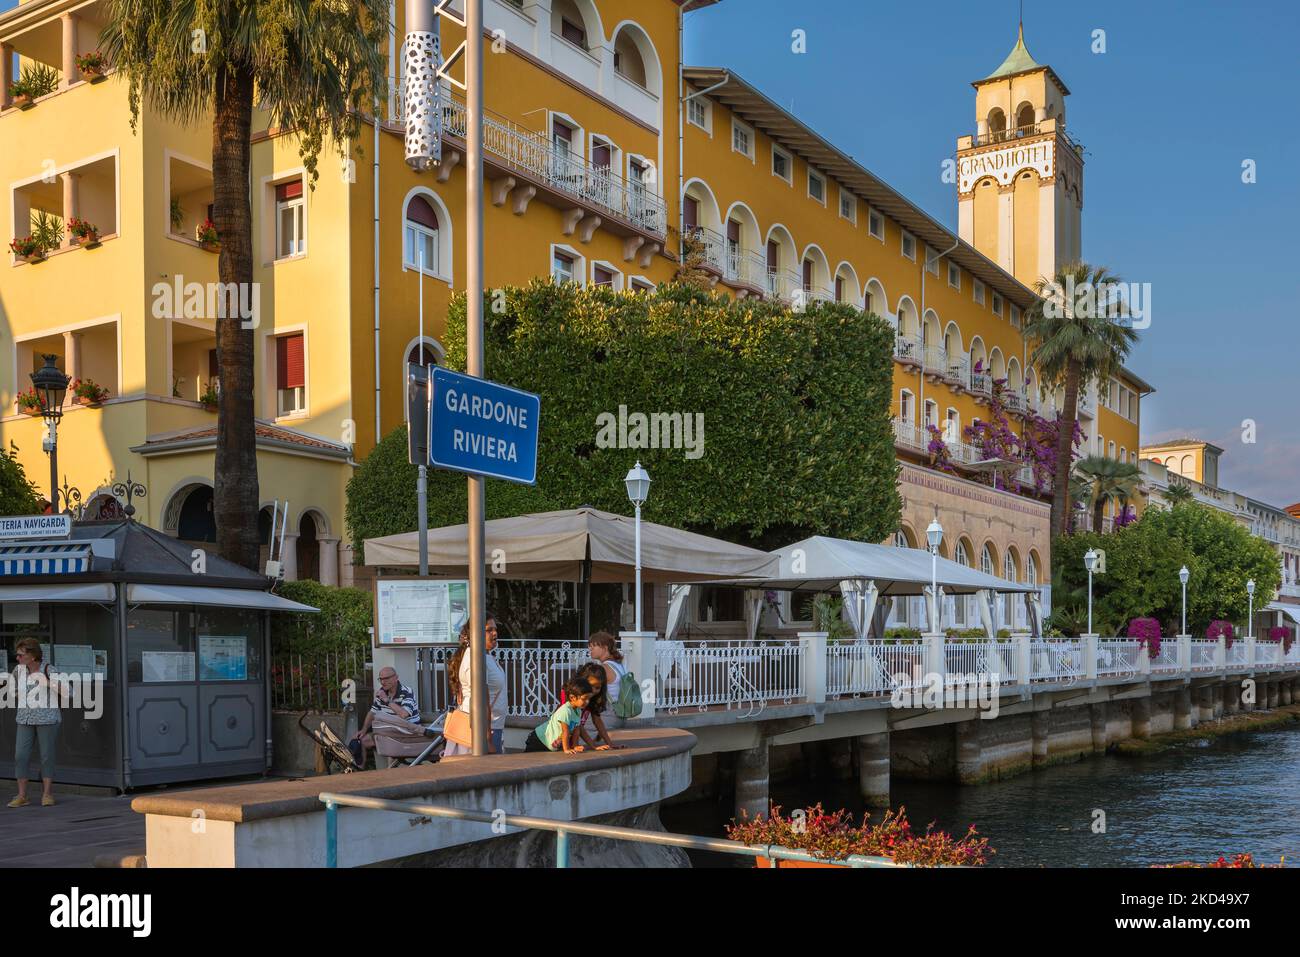 Gardone Riviera Italy, view in summer of the ferry station and the popular lakeside Grand Hotel in Gardone Riviera, Lake Garda, Lombardy, Italy Stock Photo